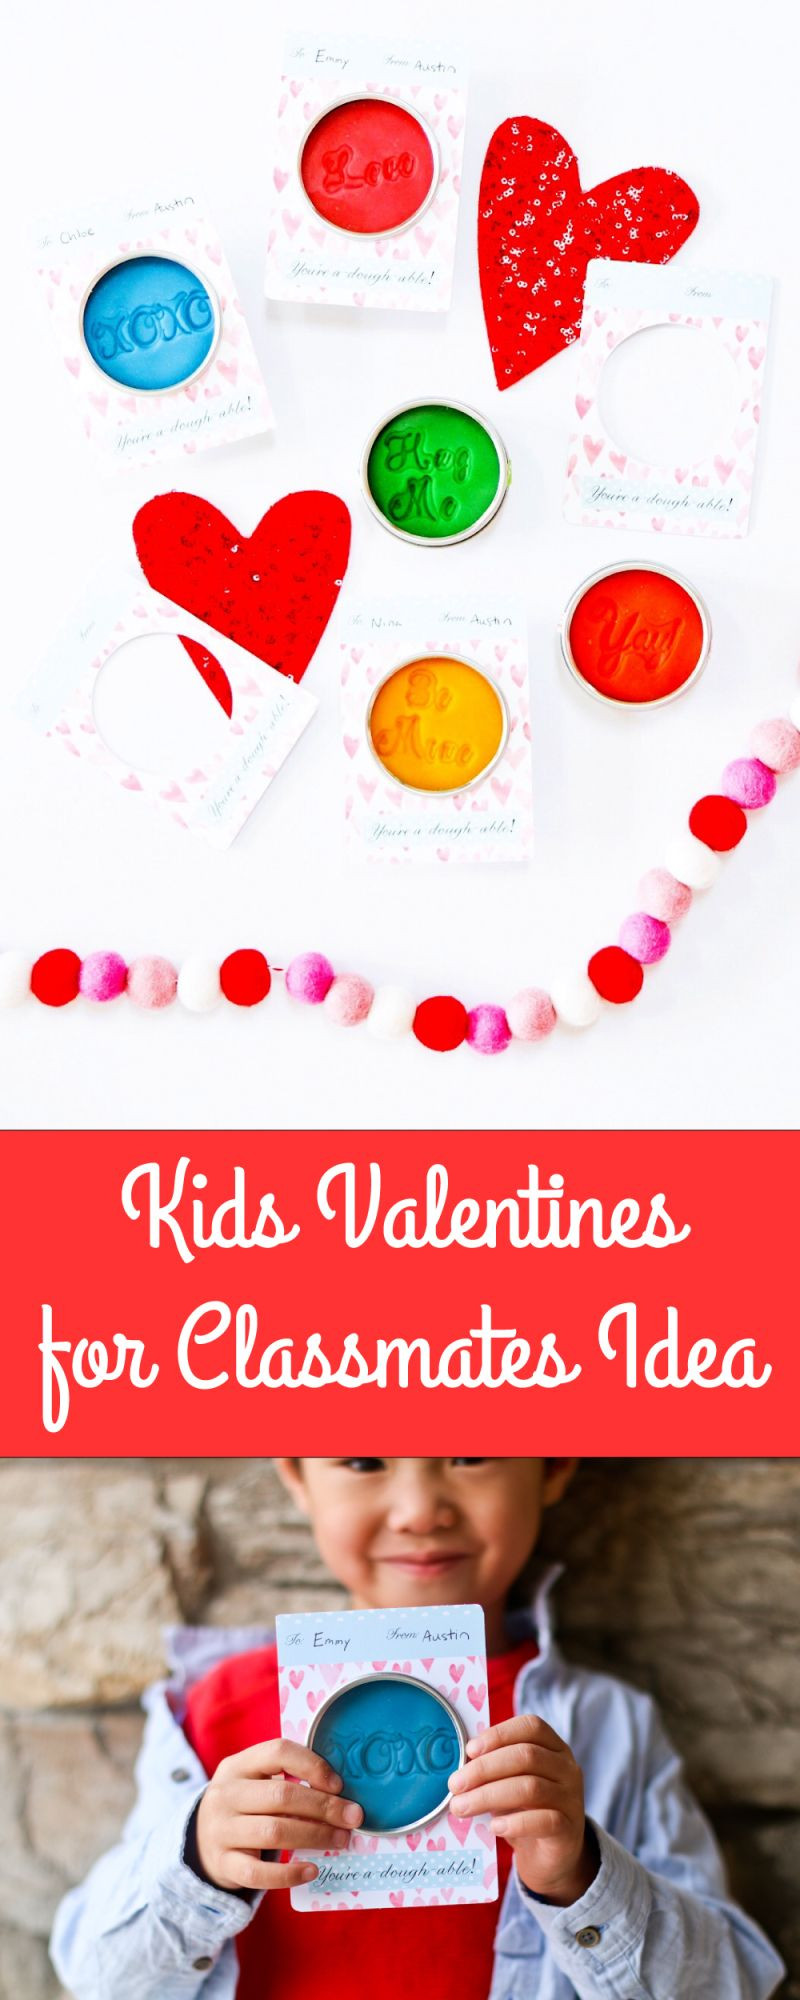 DIY Valentines Gifts For Classmates
 Valentine s Day Gift Ideas for Your Children s Classmates